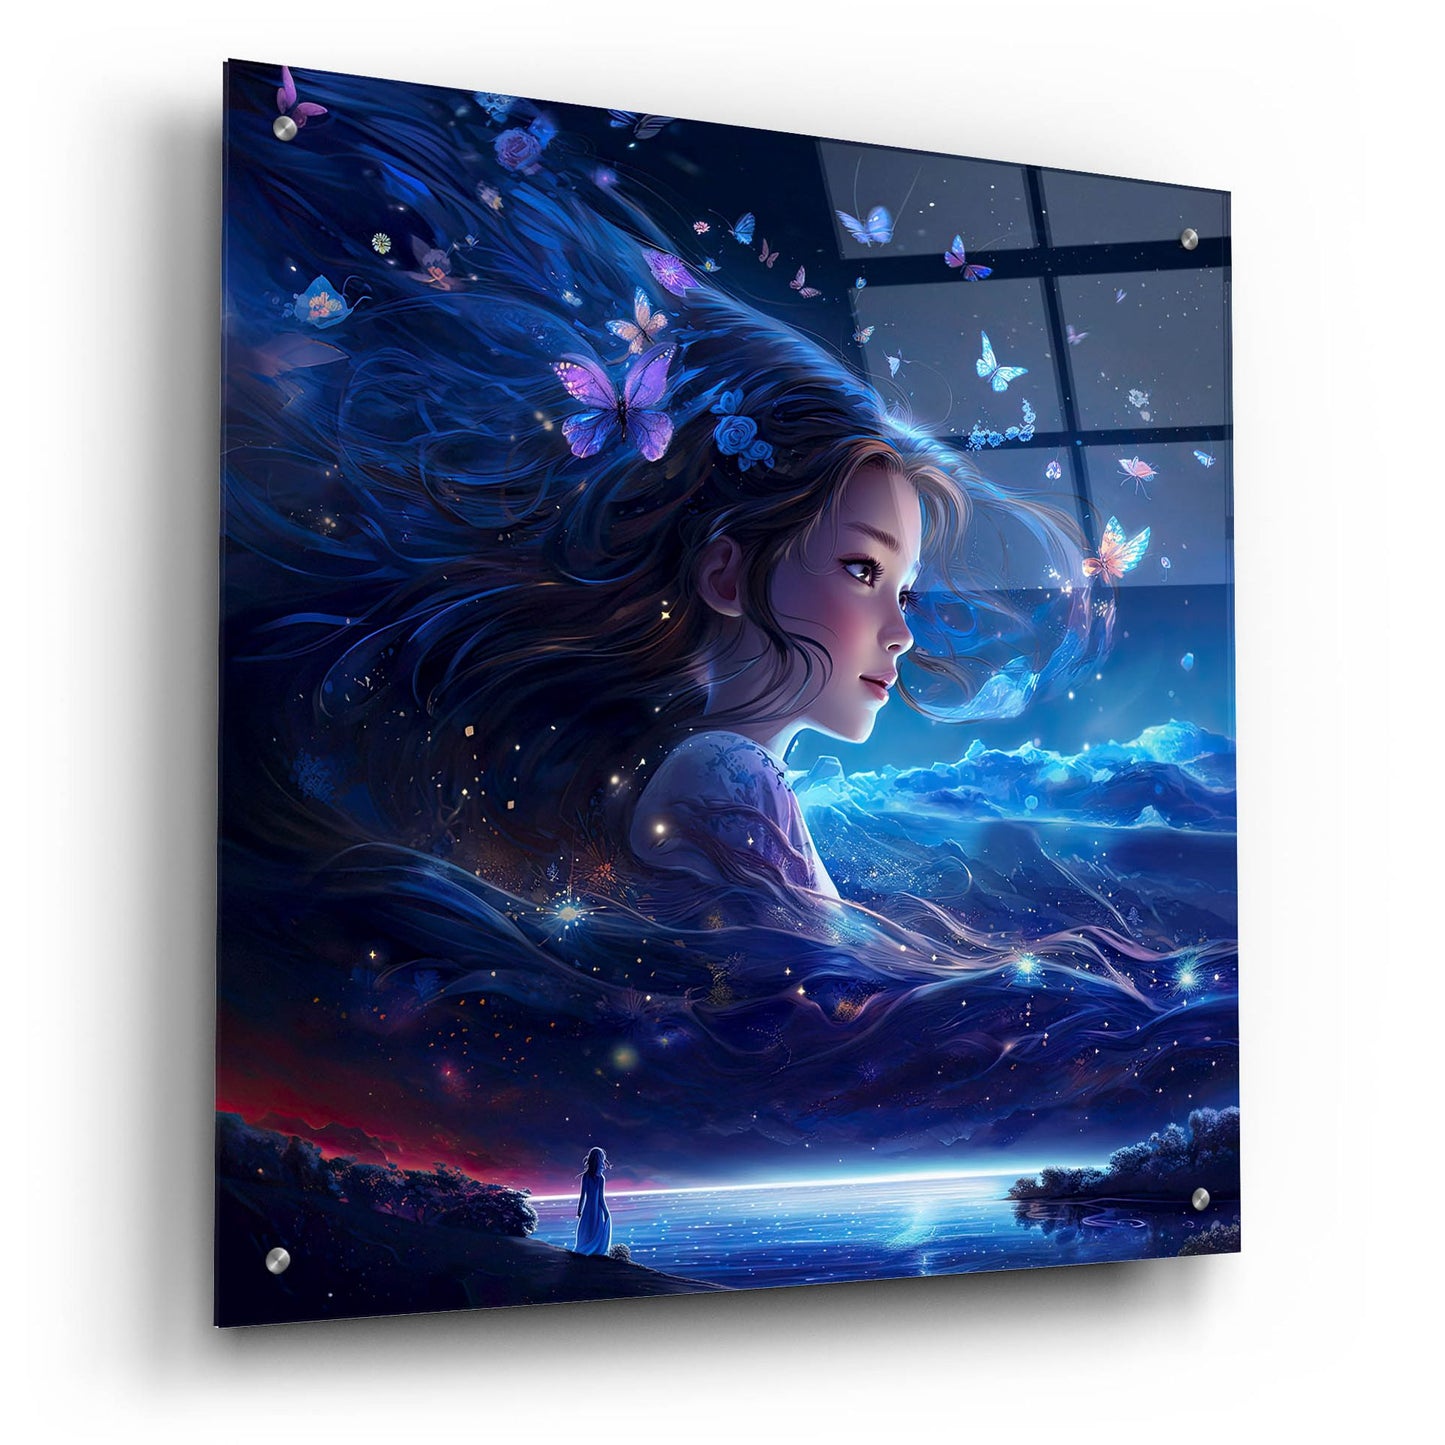 Epic Art 'In A Dream' by Cameron Gray, Acrylic Glass Wall Art,24x24